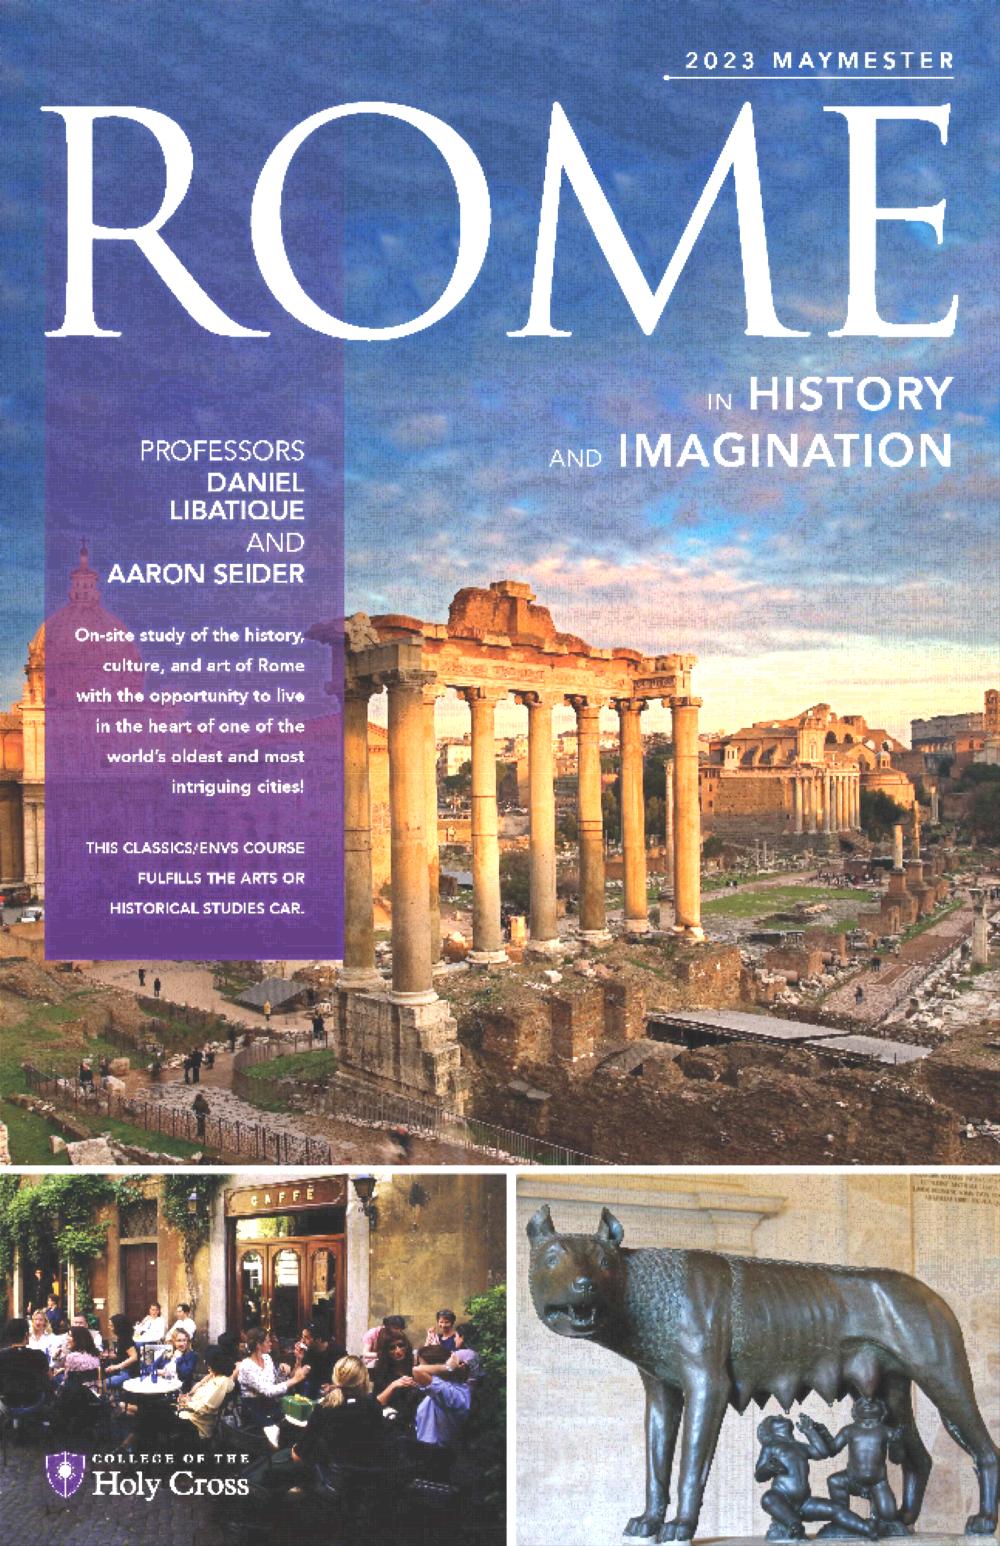 Rome H&I Maymester 2023